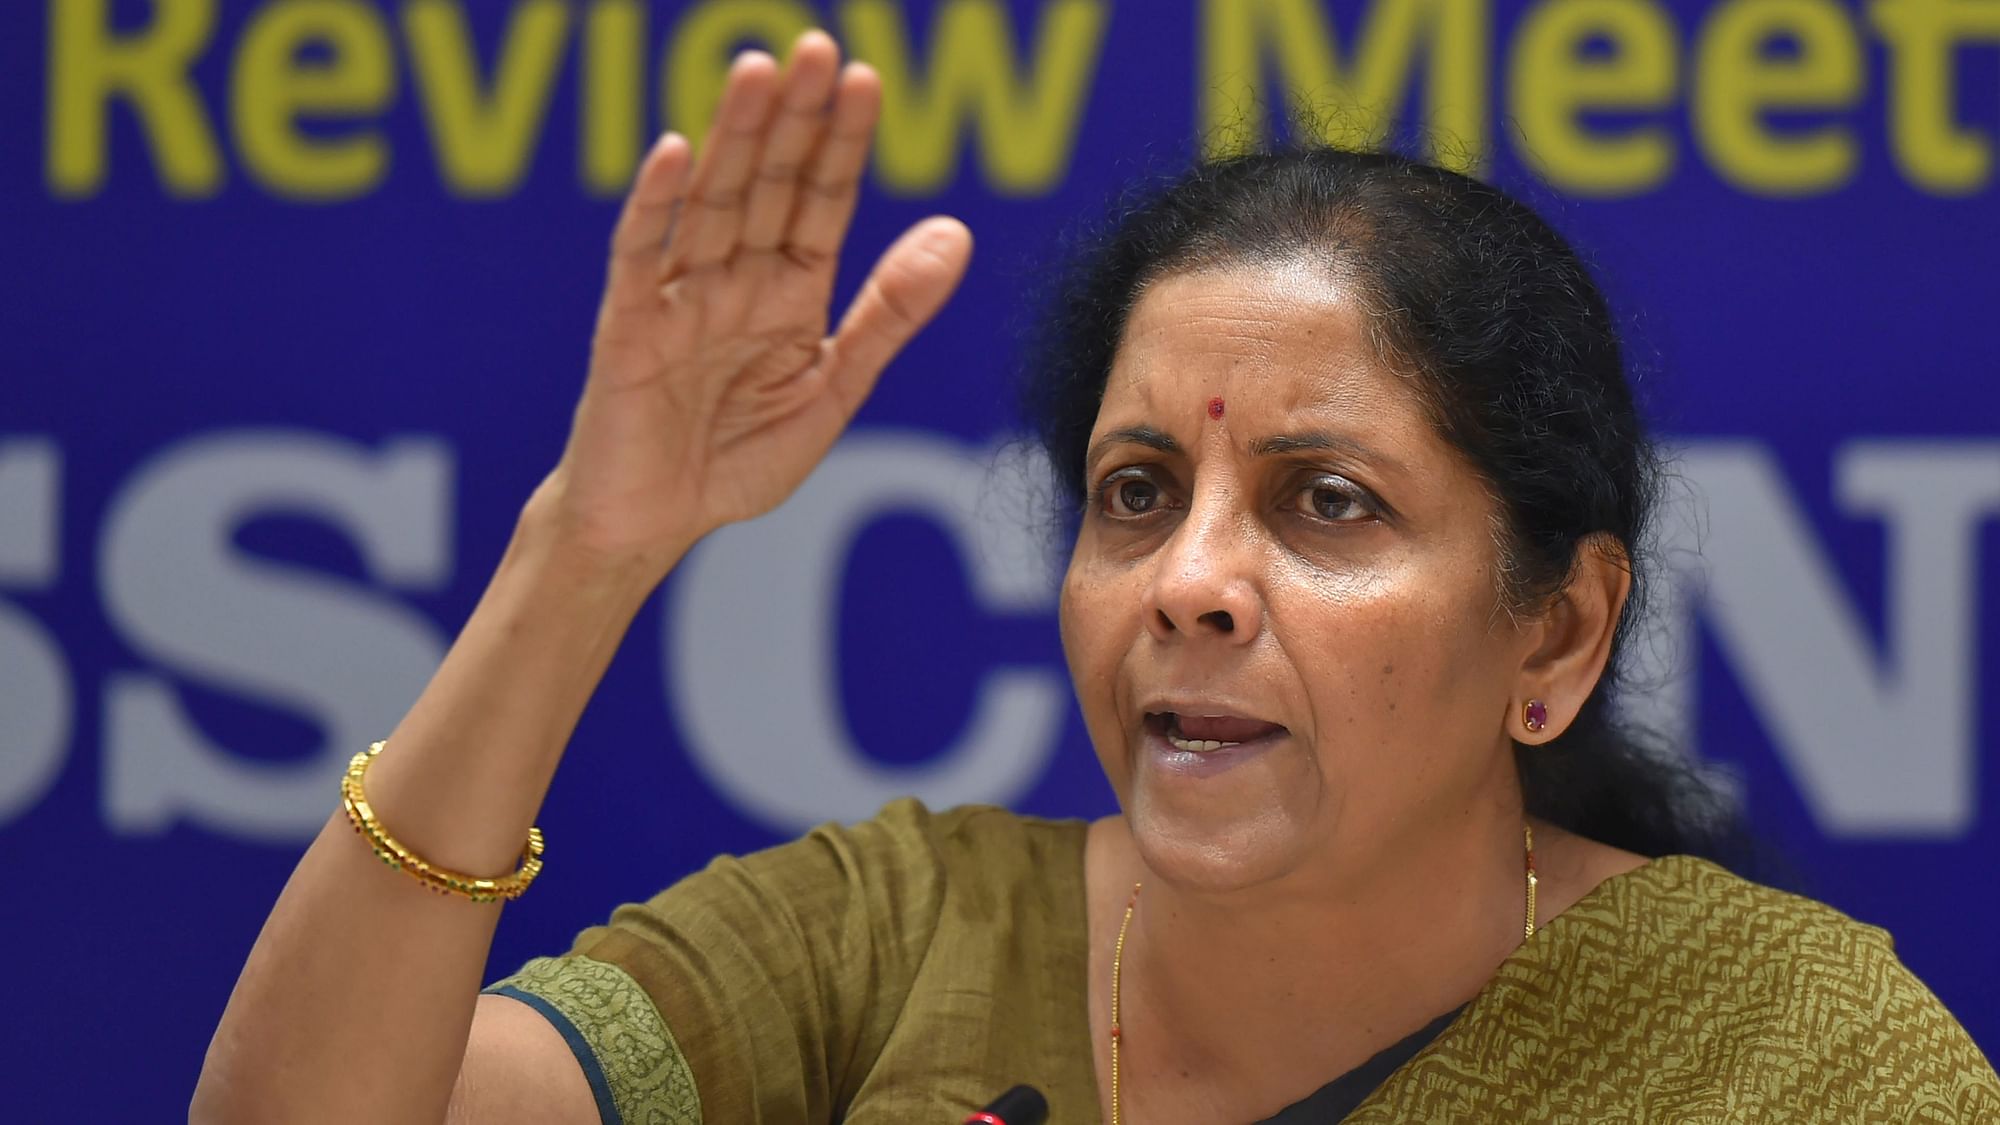 The GST Council decided to increase GST rates on mobile phones to 18 percent from 12 percent with effect from 1 April, Finance Minister Nirmala Sitharaman said.